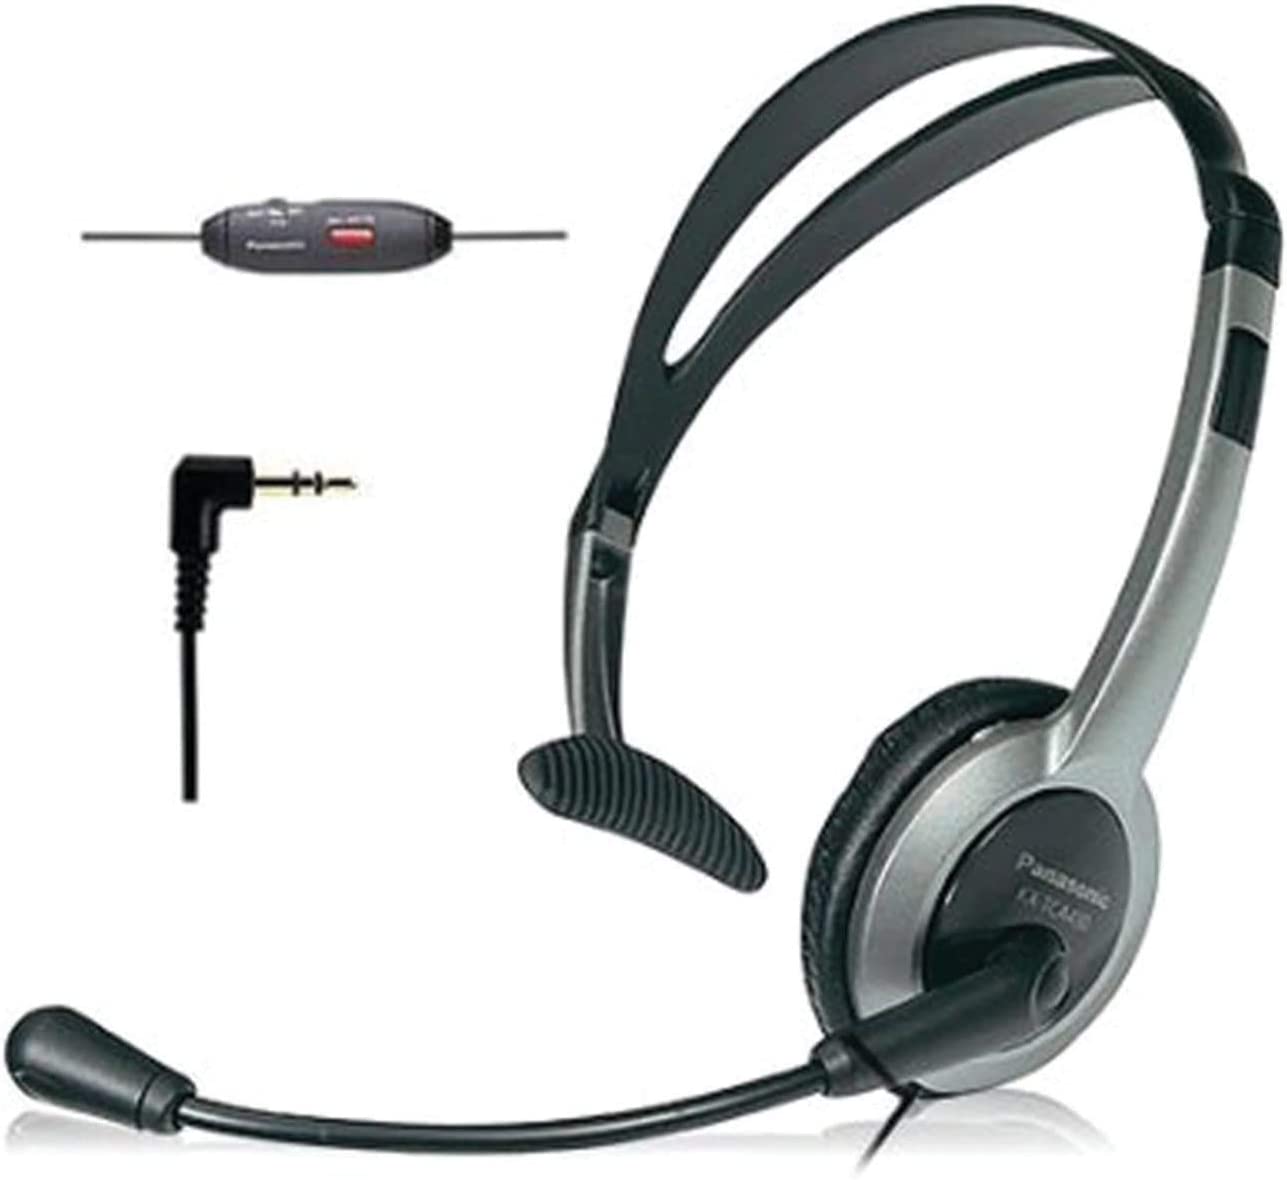 Panasonic Comfort Fit Headset for TCA Series Cordless Landline Phones, Foldable Headset with Flexible